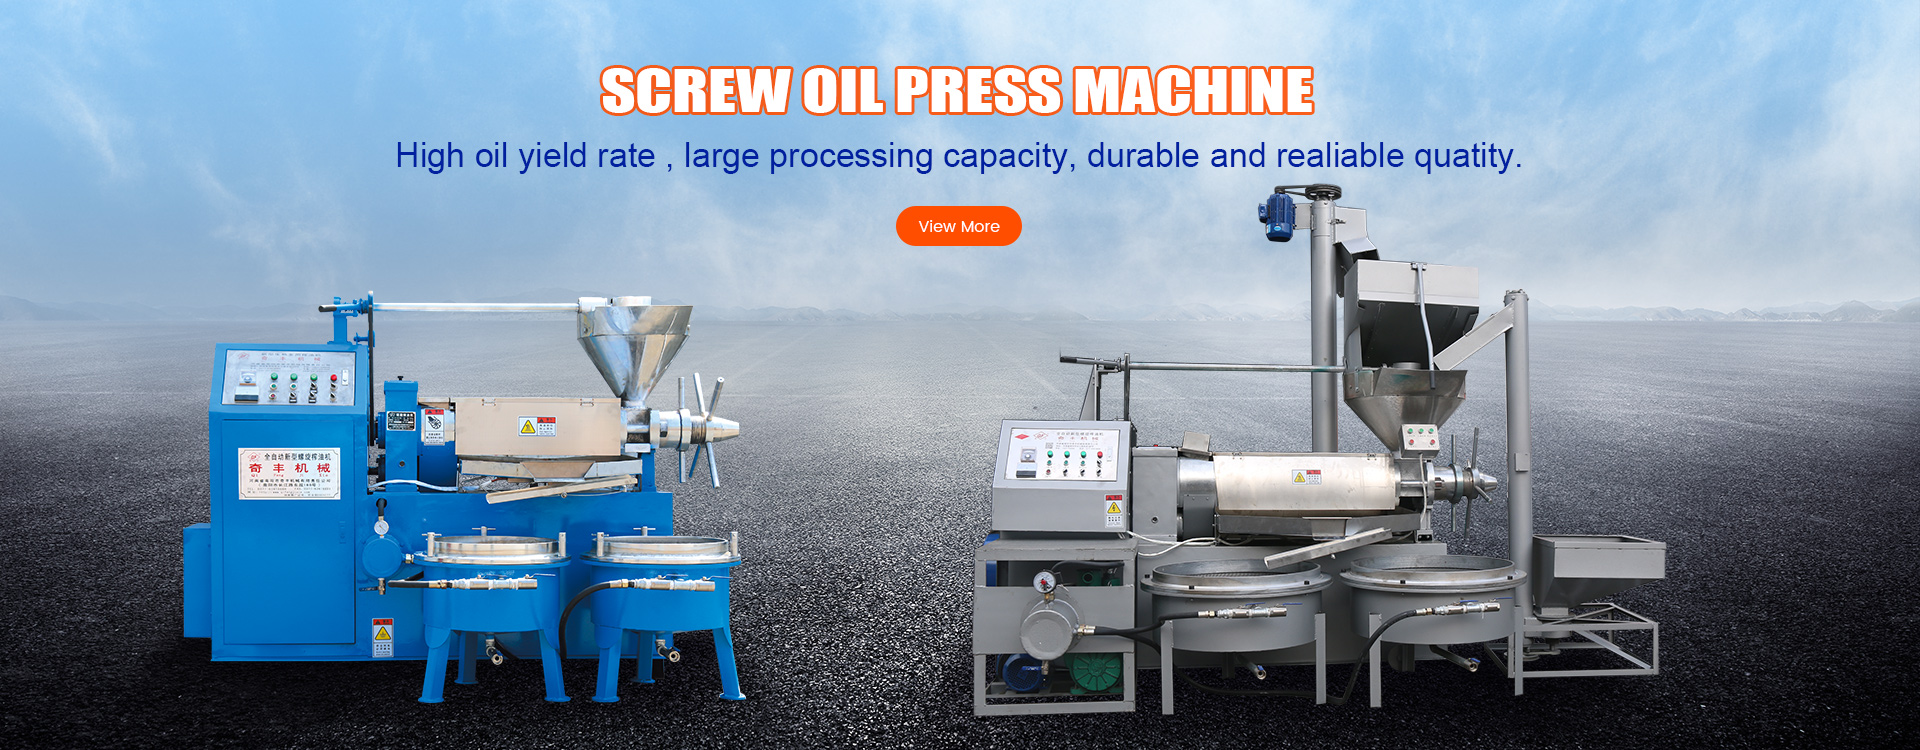 best oil press machine for home